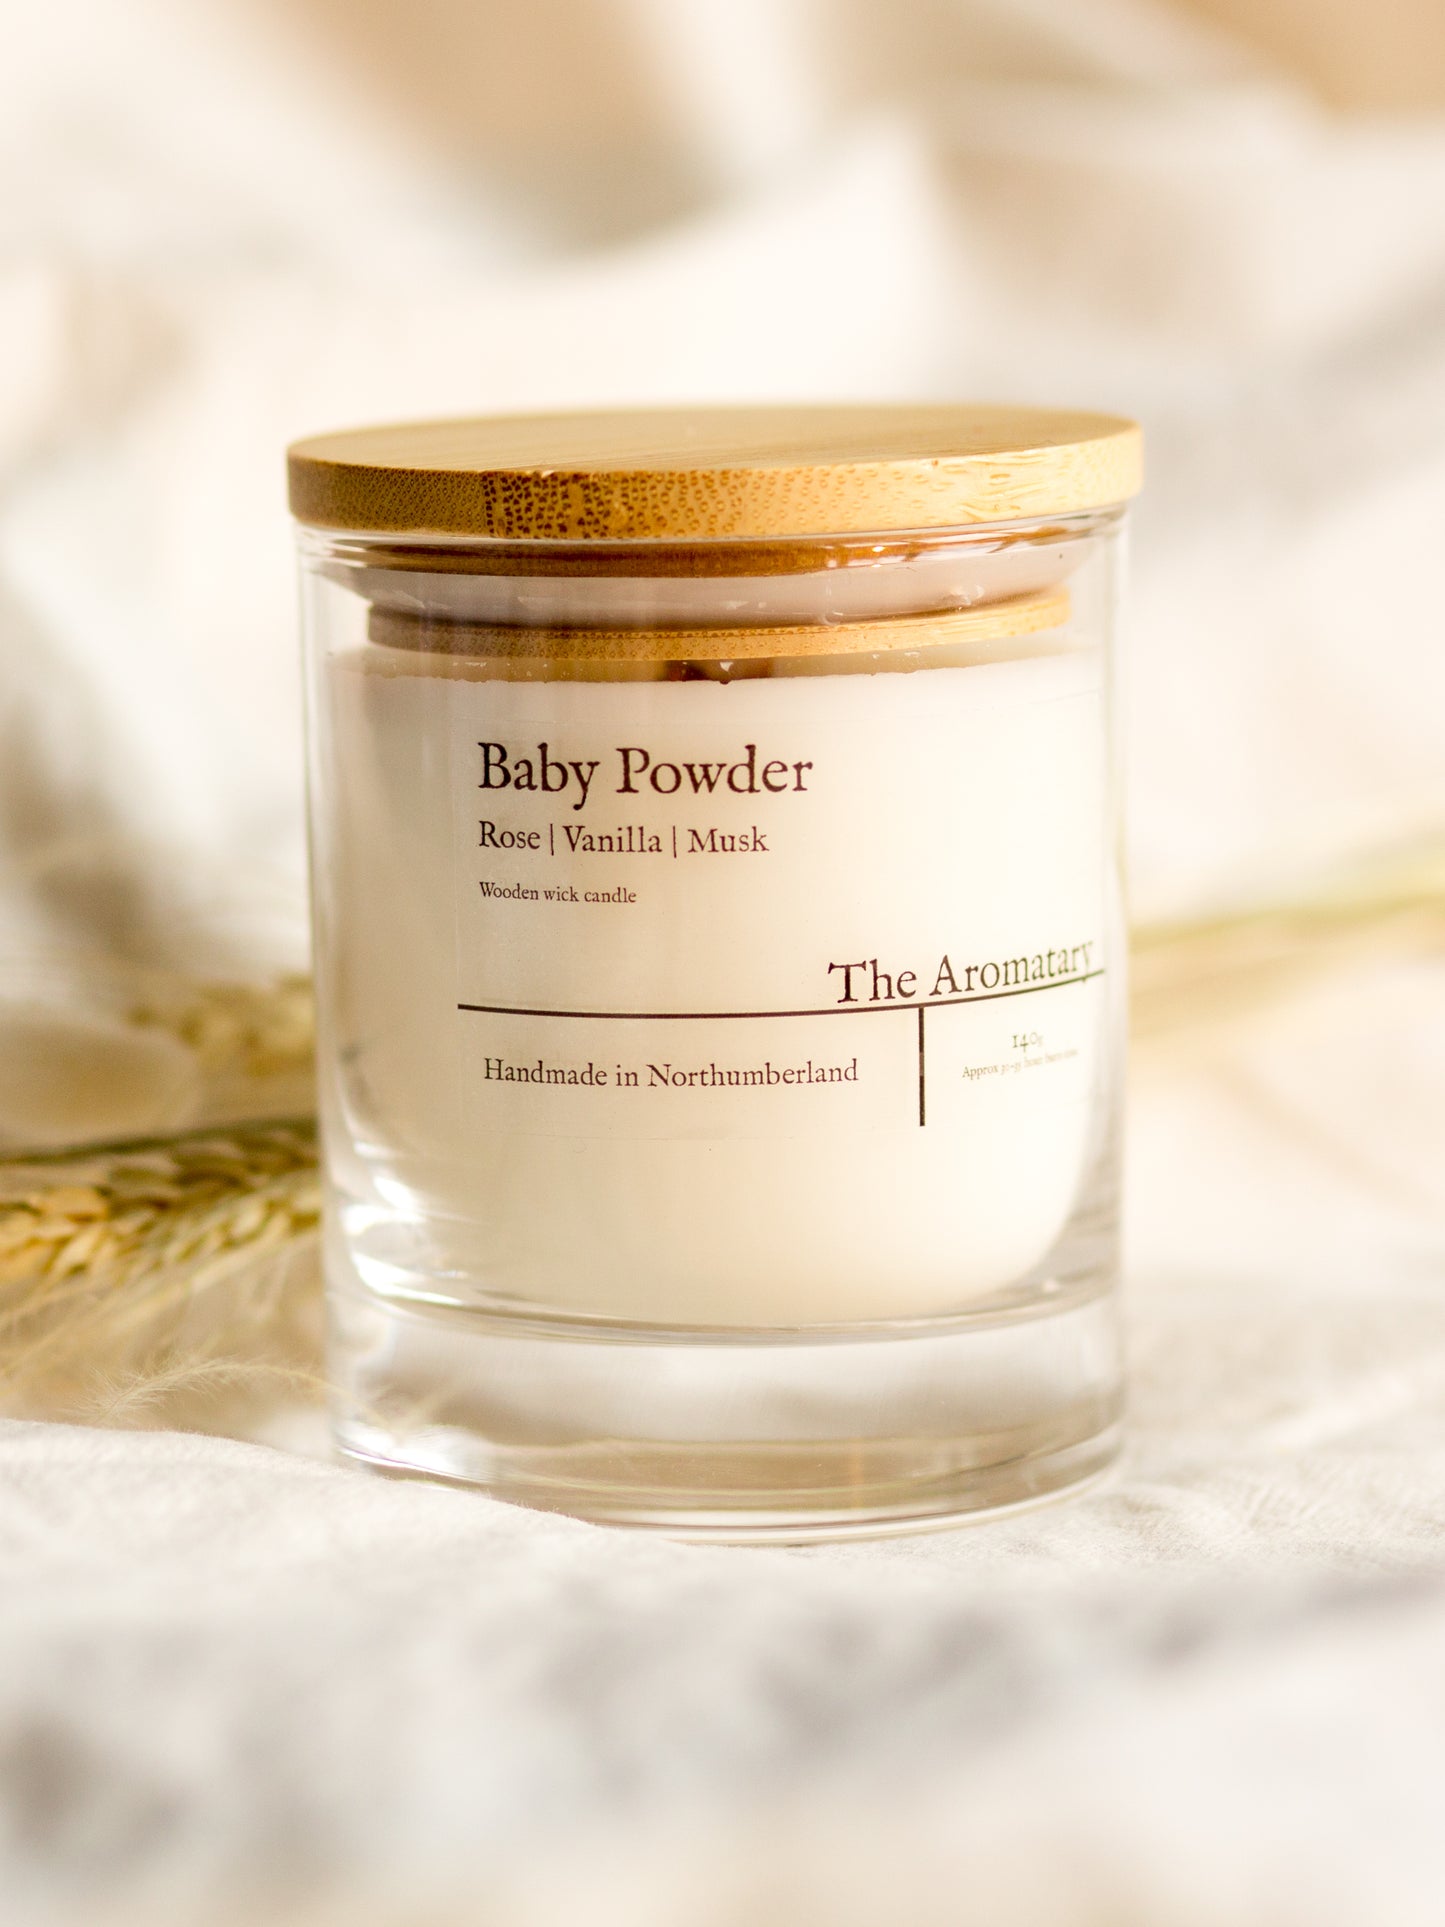 Baby Powder classic wooden wick candle